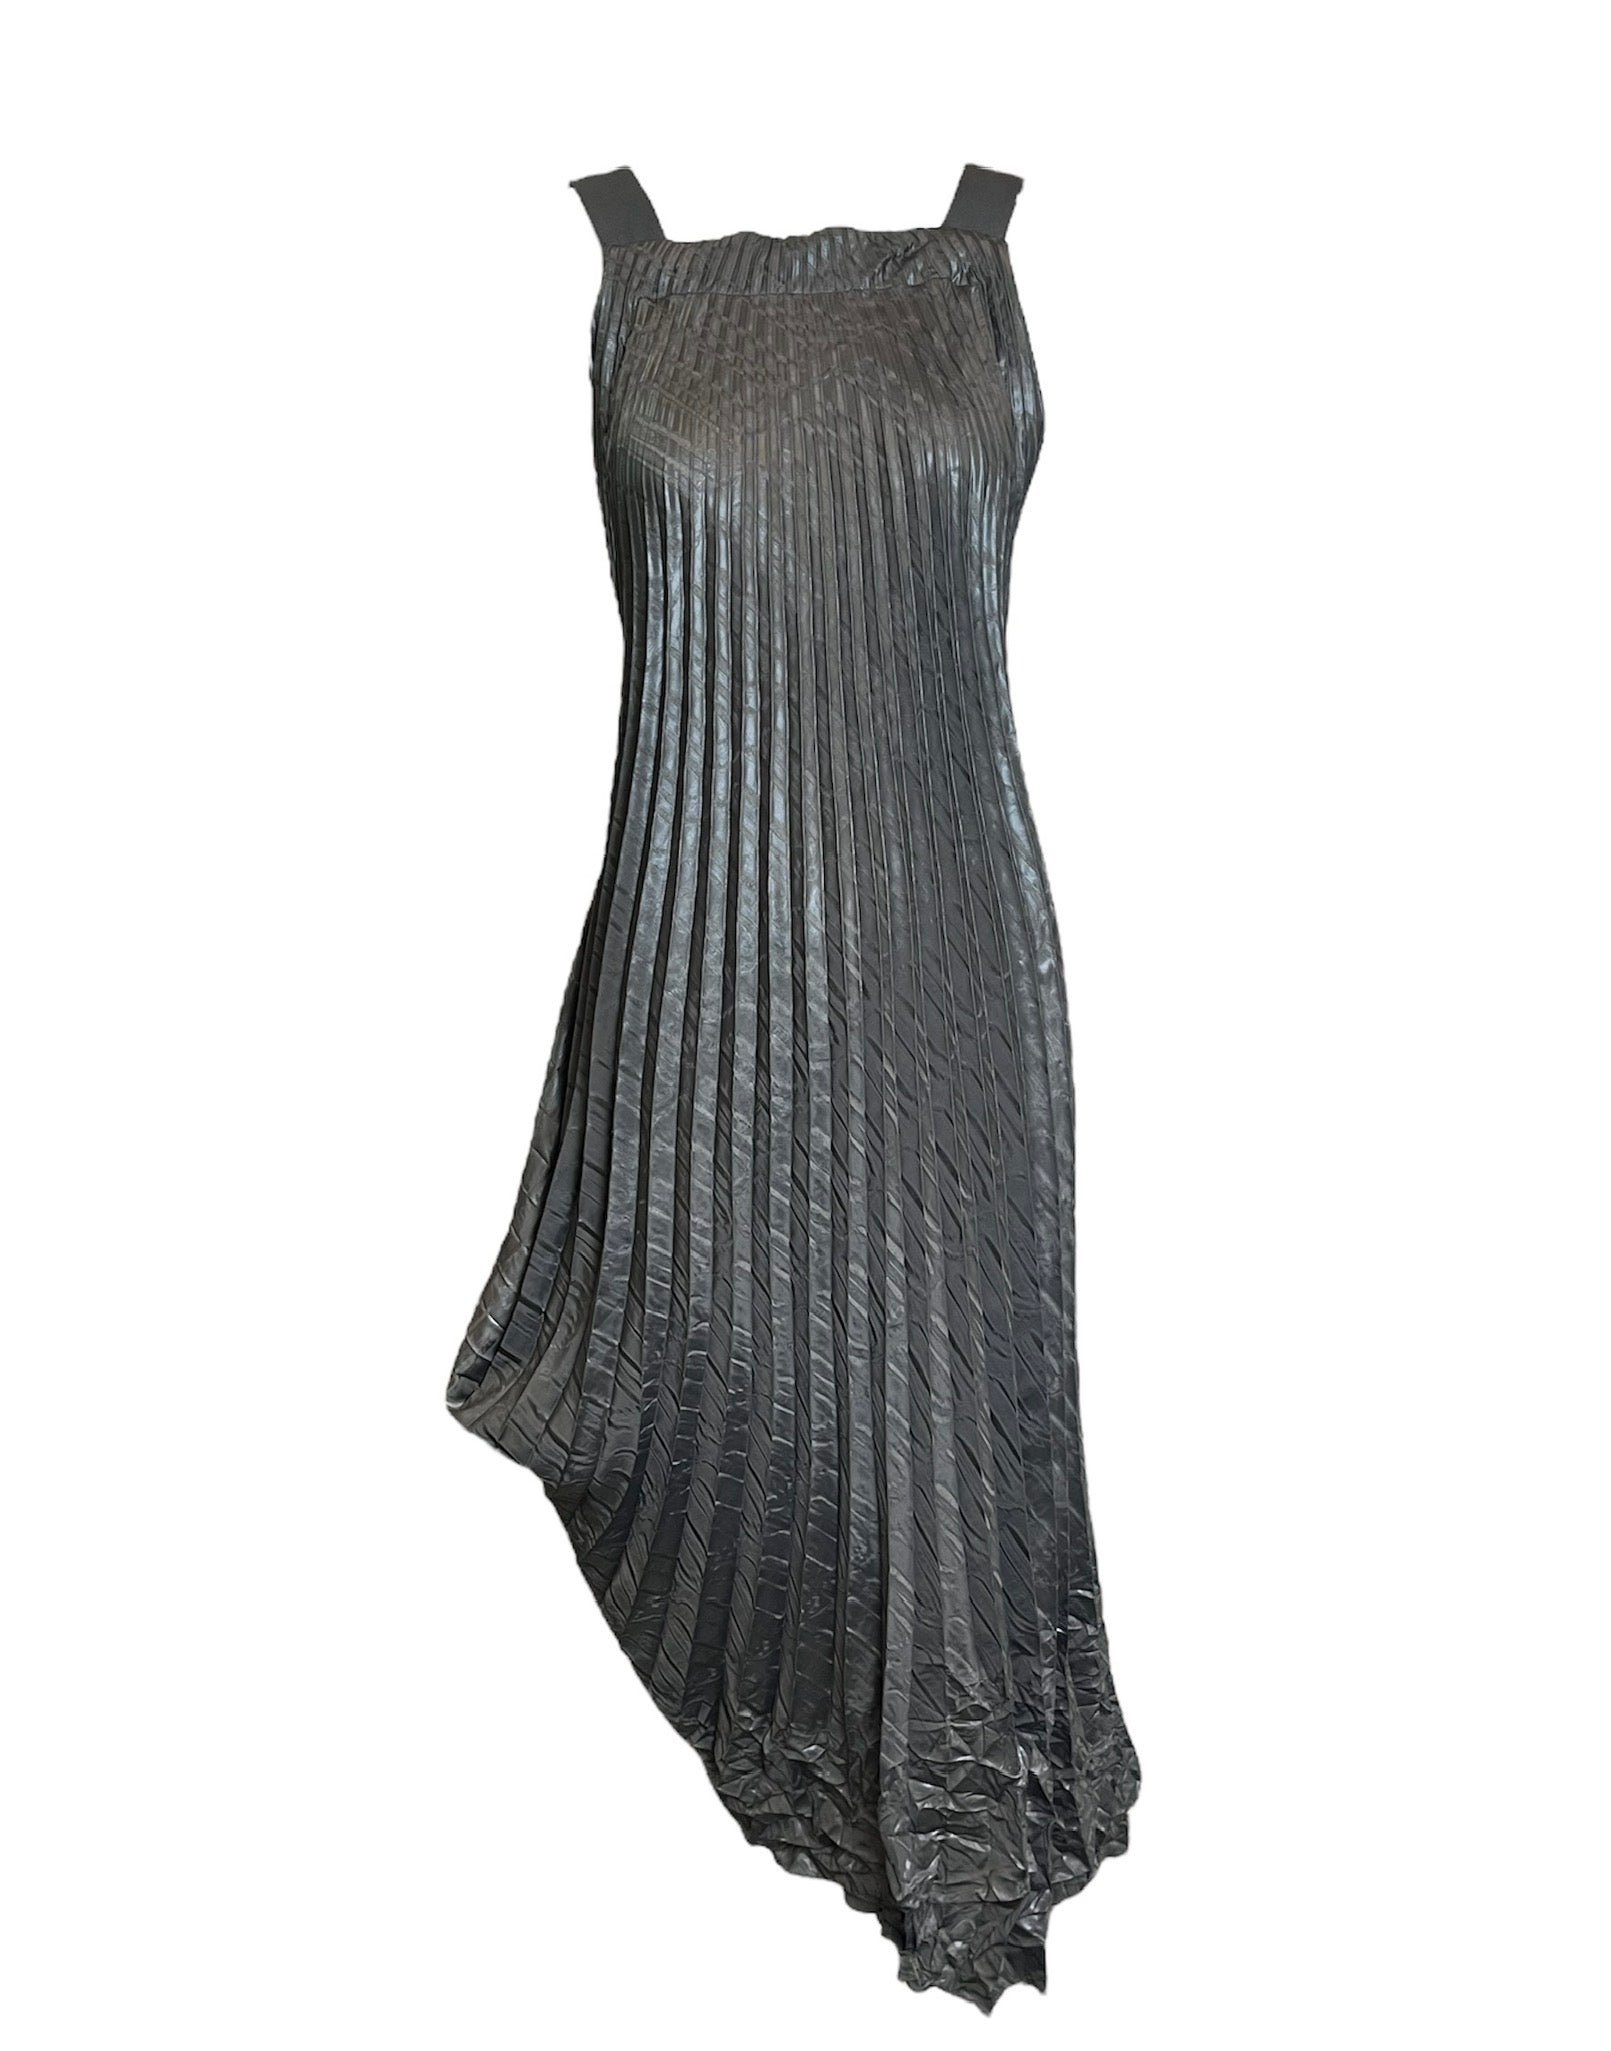 Marithe + Francois Girbaud 90s Gun Metal Pleated Asymmetric Halter Gown with Ruched Bottom Pleat FRONT